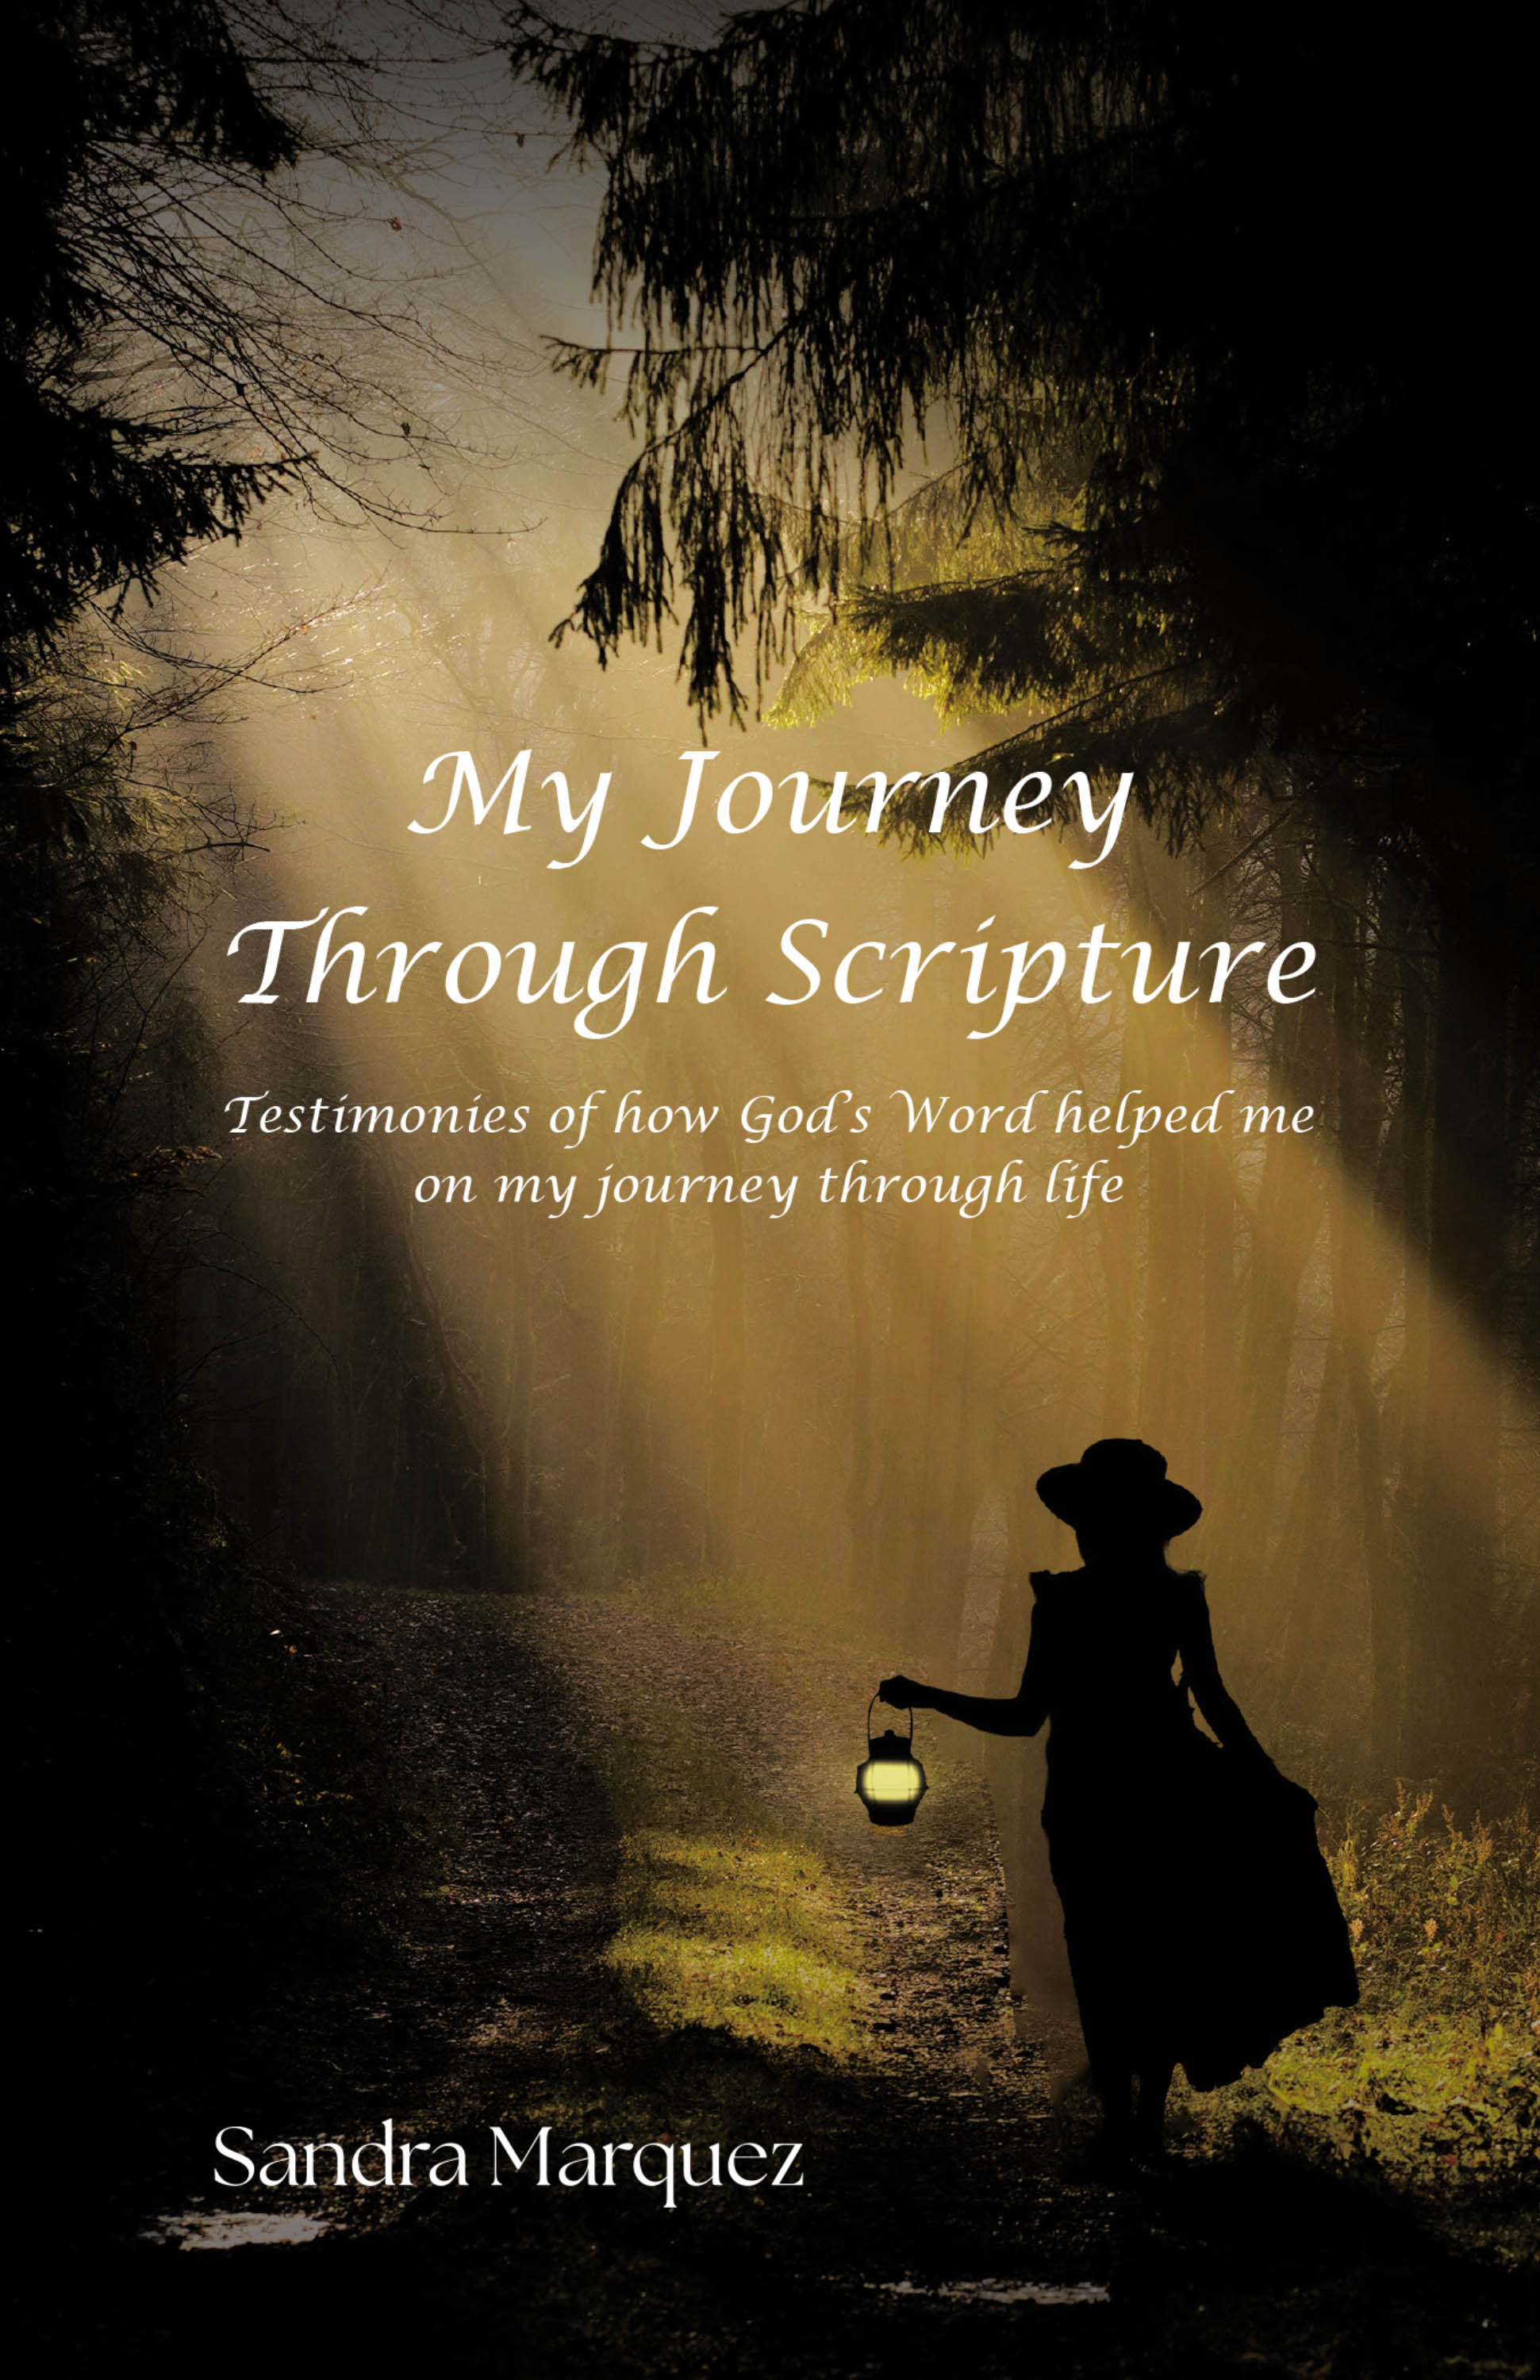 Sandra Marquez’s Newly Released "My Journey Through Scripture" is a Powerful Collection of Personal Experiences and a Growing Faith